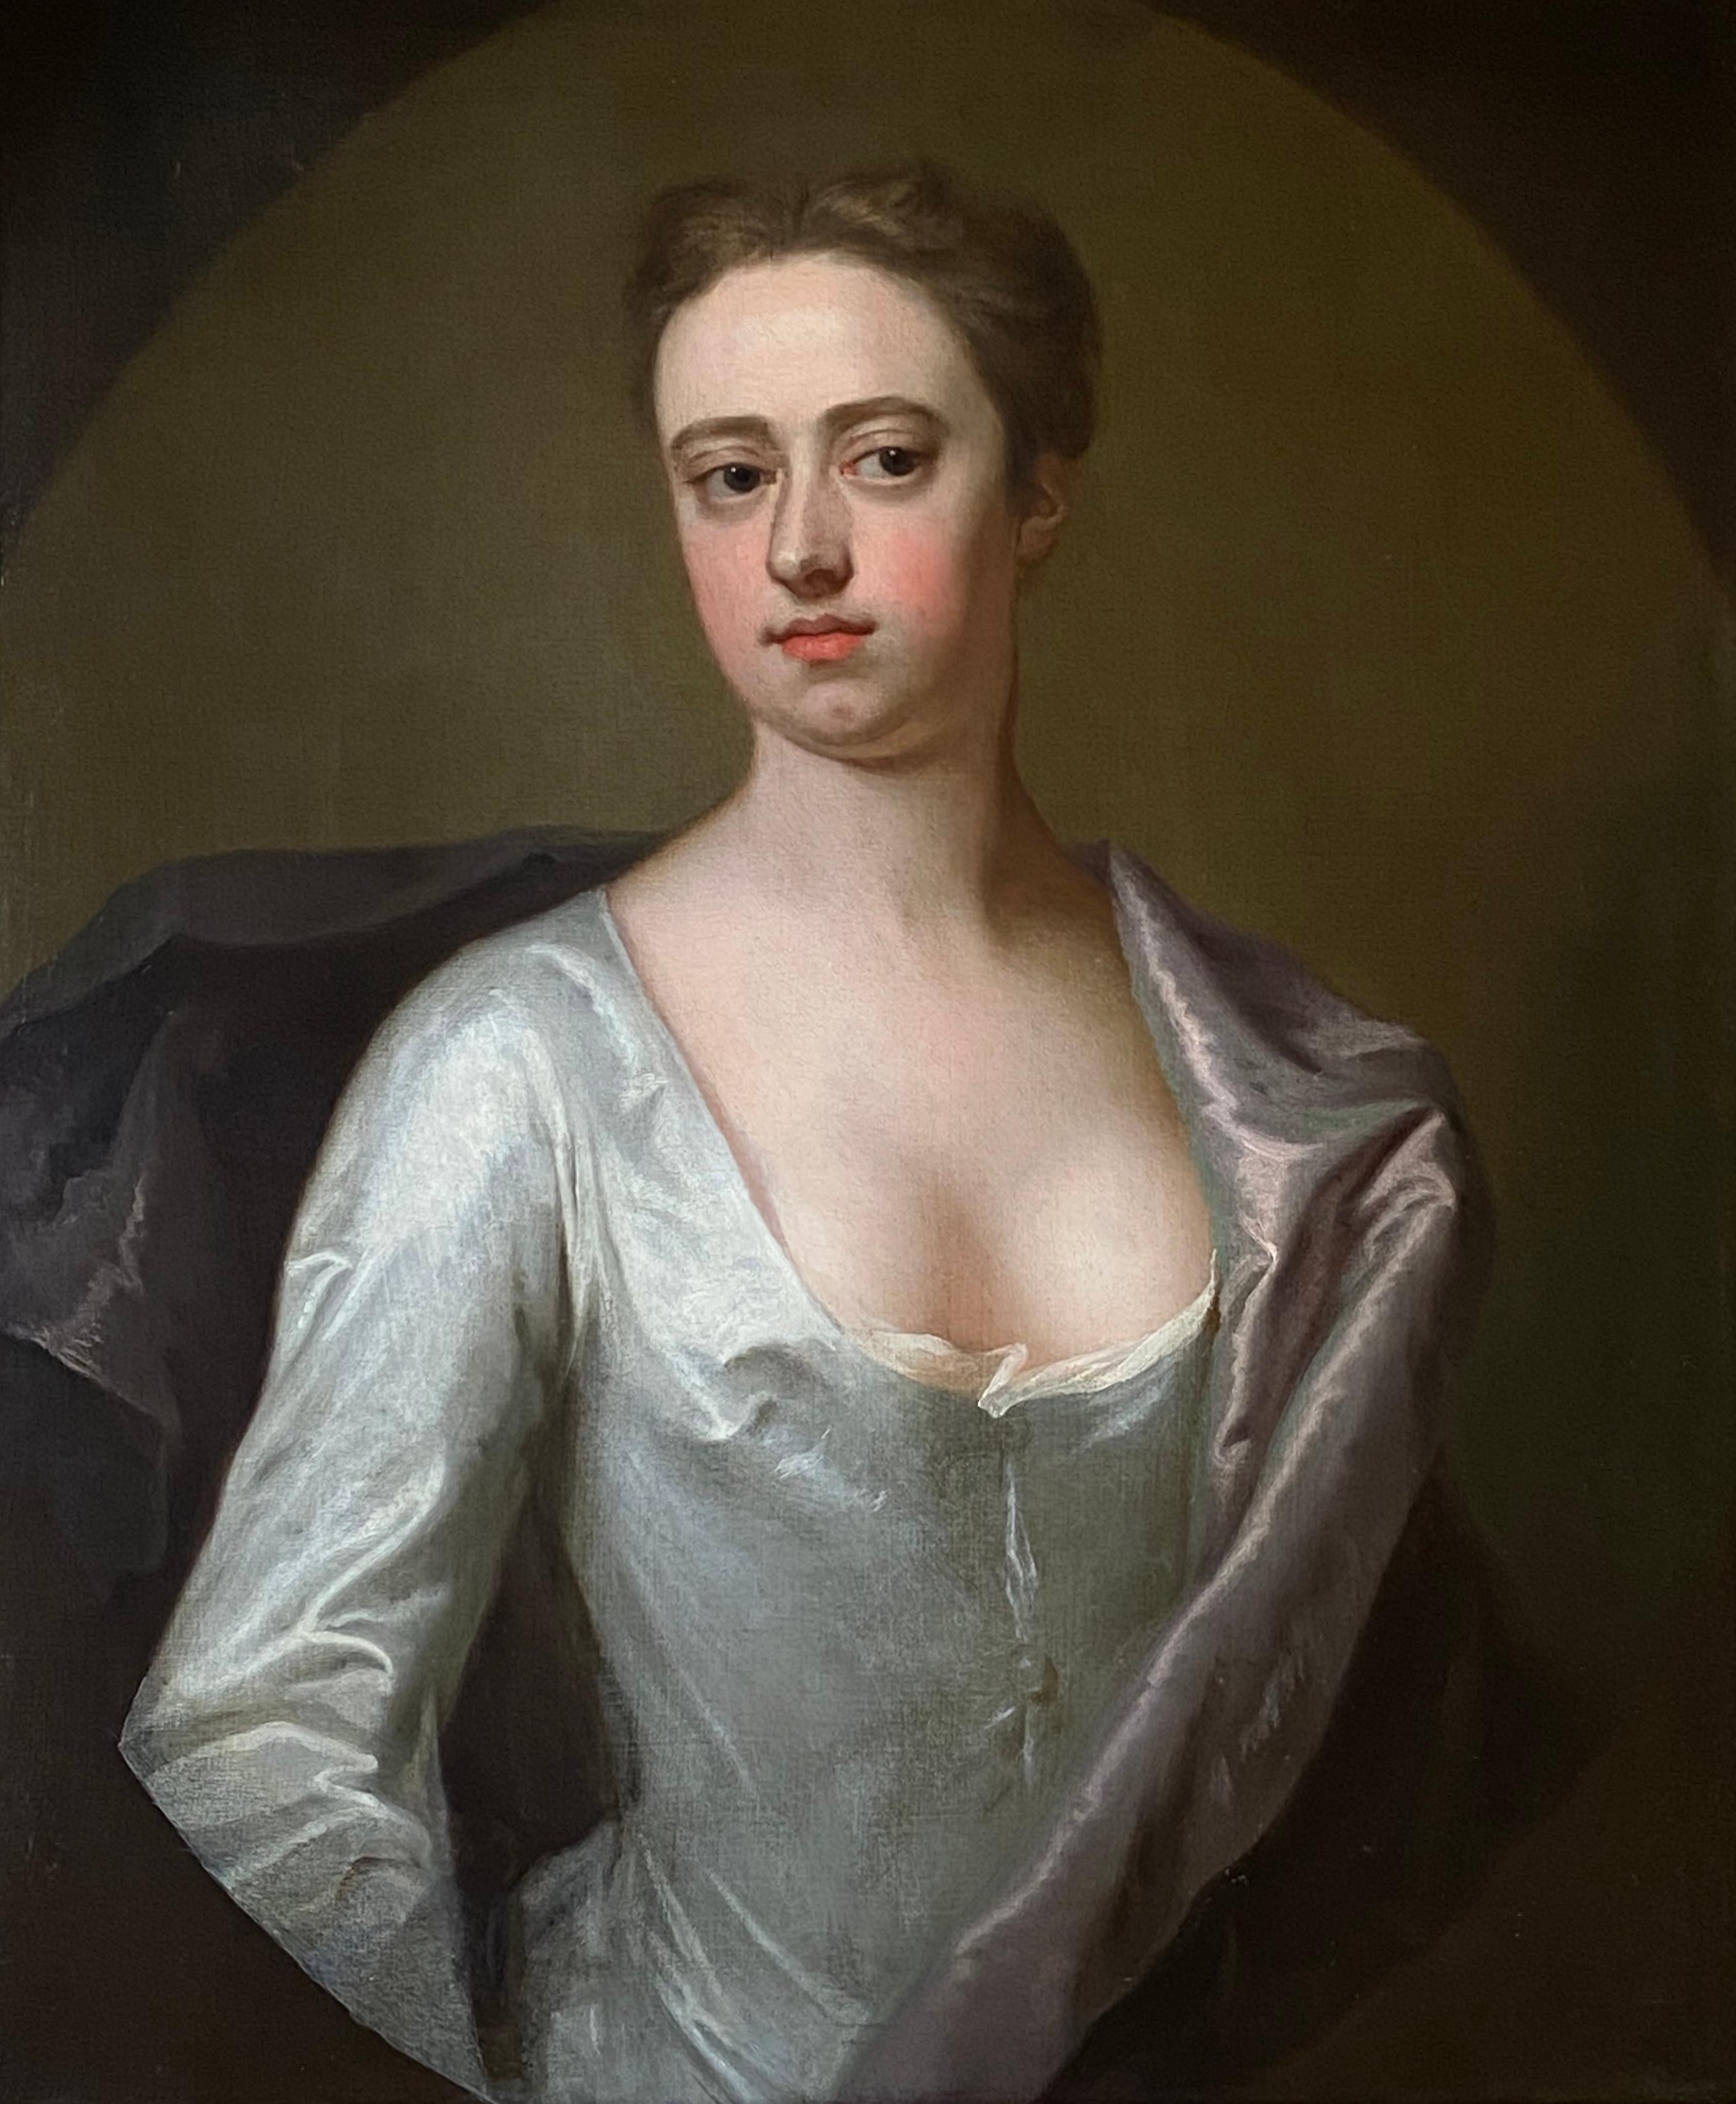 EARLY 18TH CENTURY ENGLISH PORTRAIT OF A LADY IN A WHITE SILK DRESS. - Painting by Michael Dahl